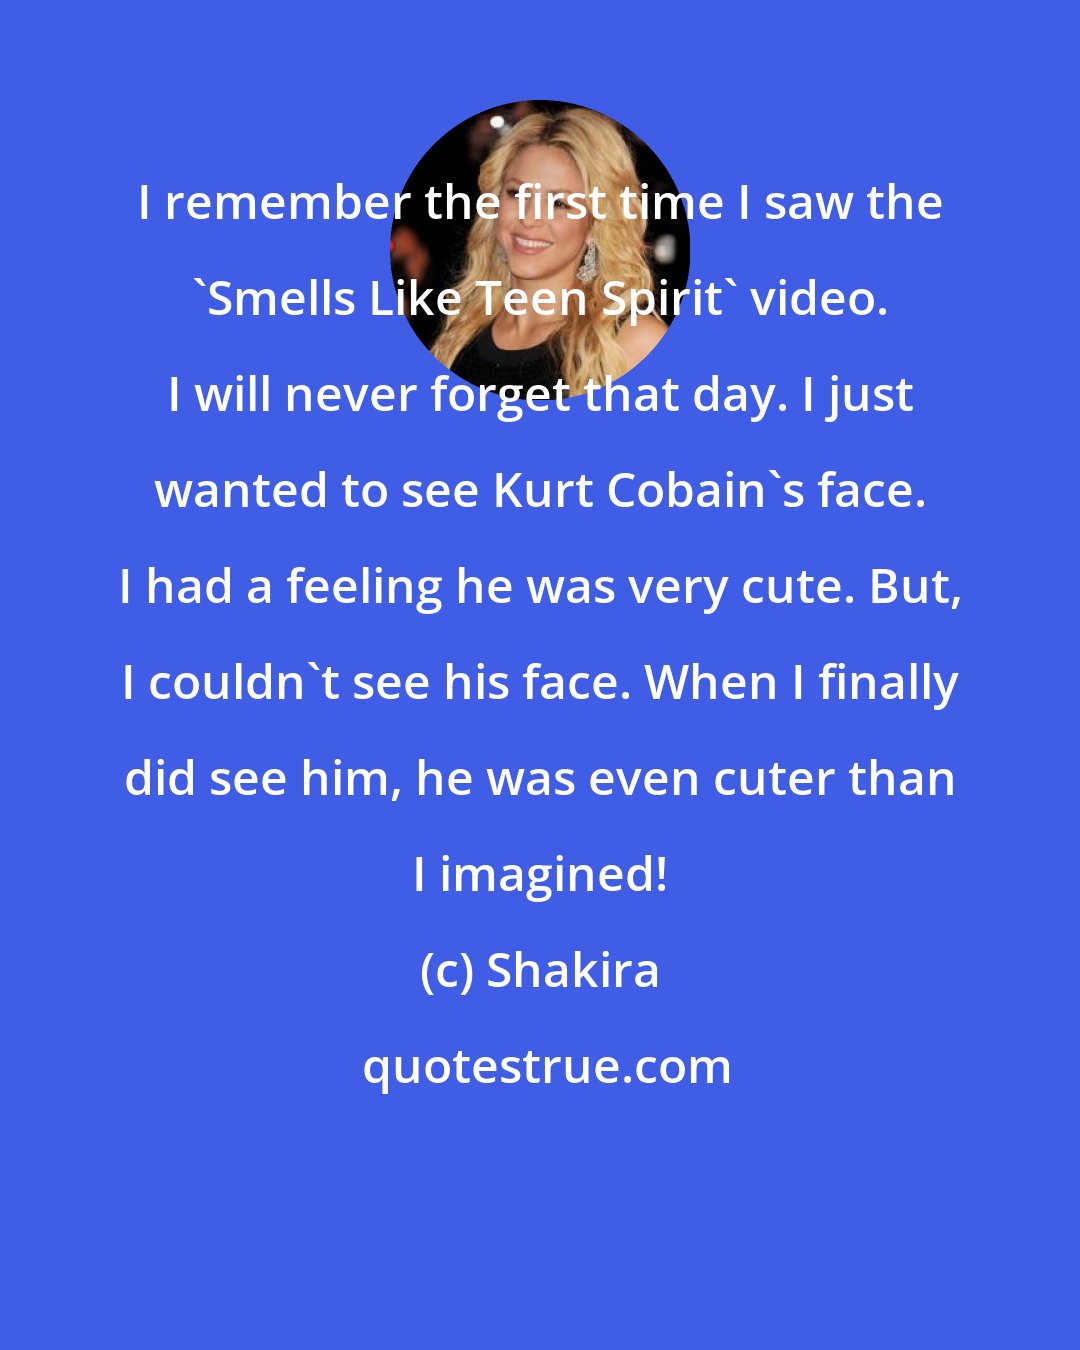 Shakira: I remember the first time I saw the 'Smells Like Teen Spirit' video. I will never forget that day. I just wanted to see Kurt Cobain's face. I had a feeling he was very cute. But, I couldn't see his face. When I finally did see him, he was even cuter than I imagined!